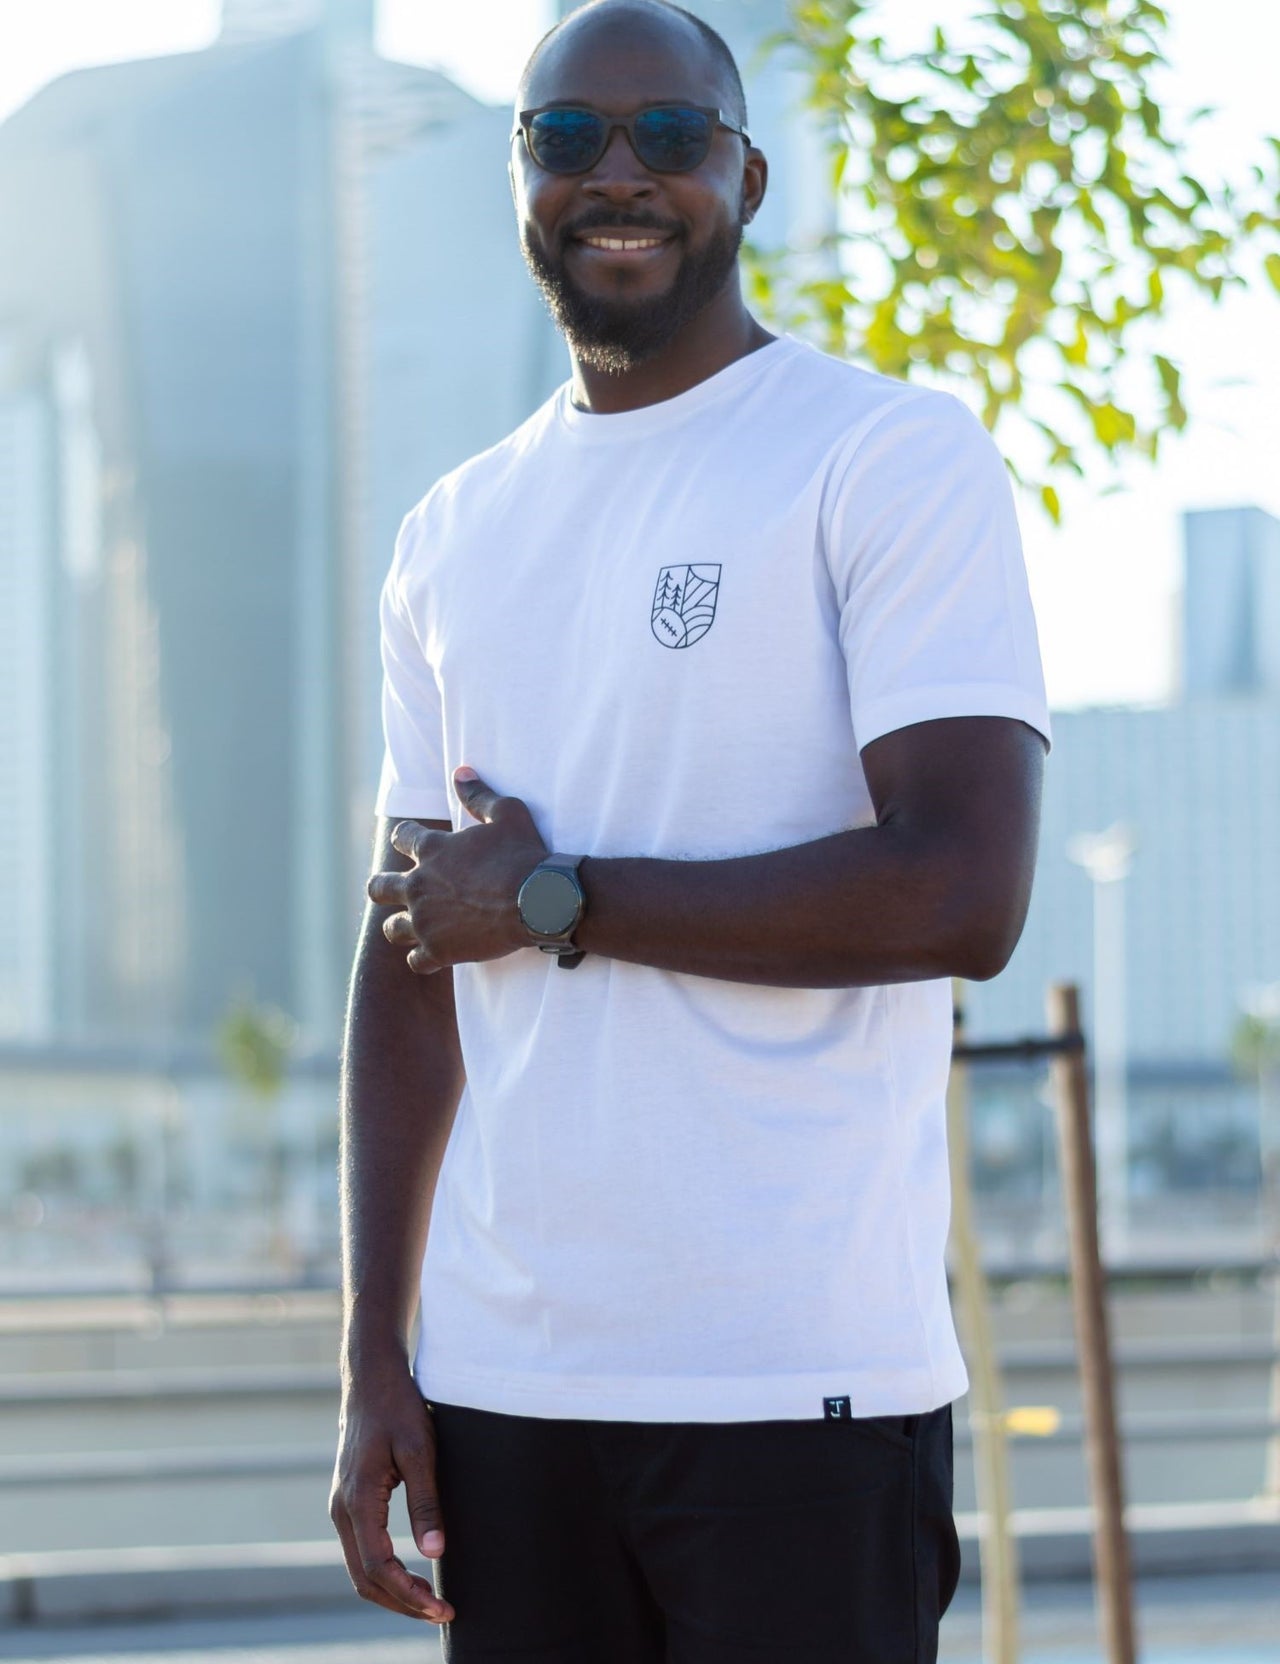 A tall and skinny guy in the street and wearing a white minimal graphic tall t-shirt.